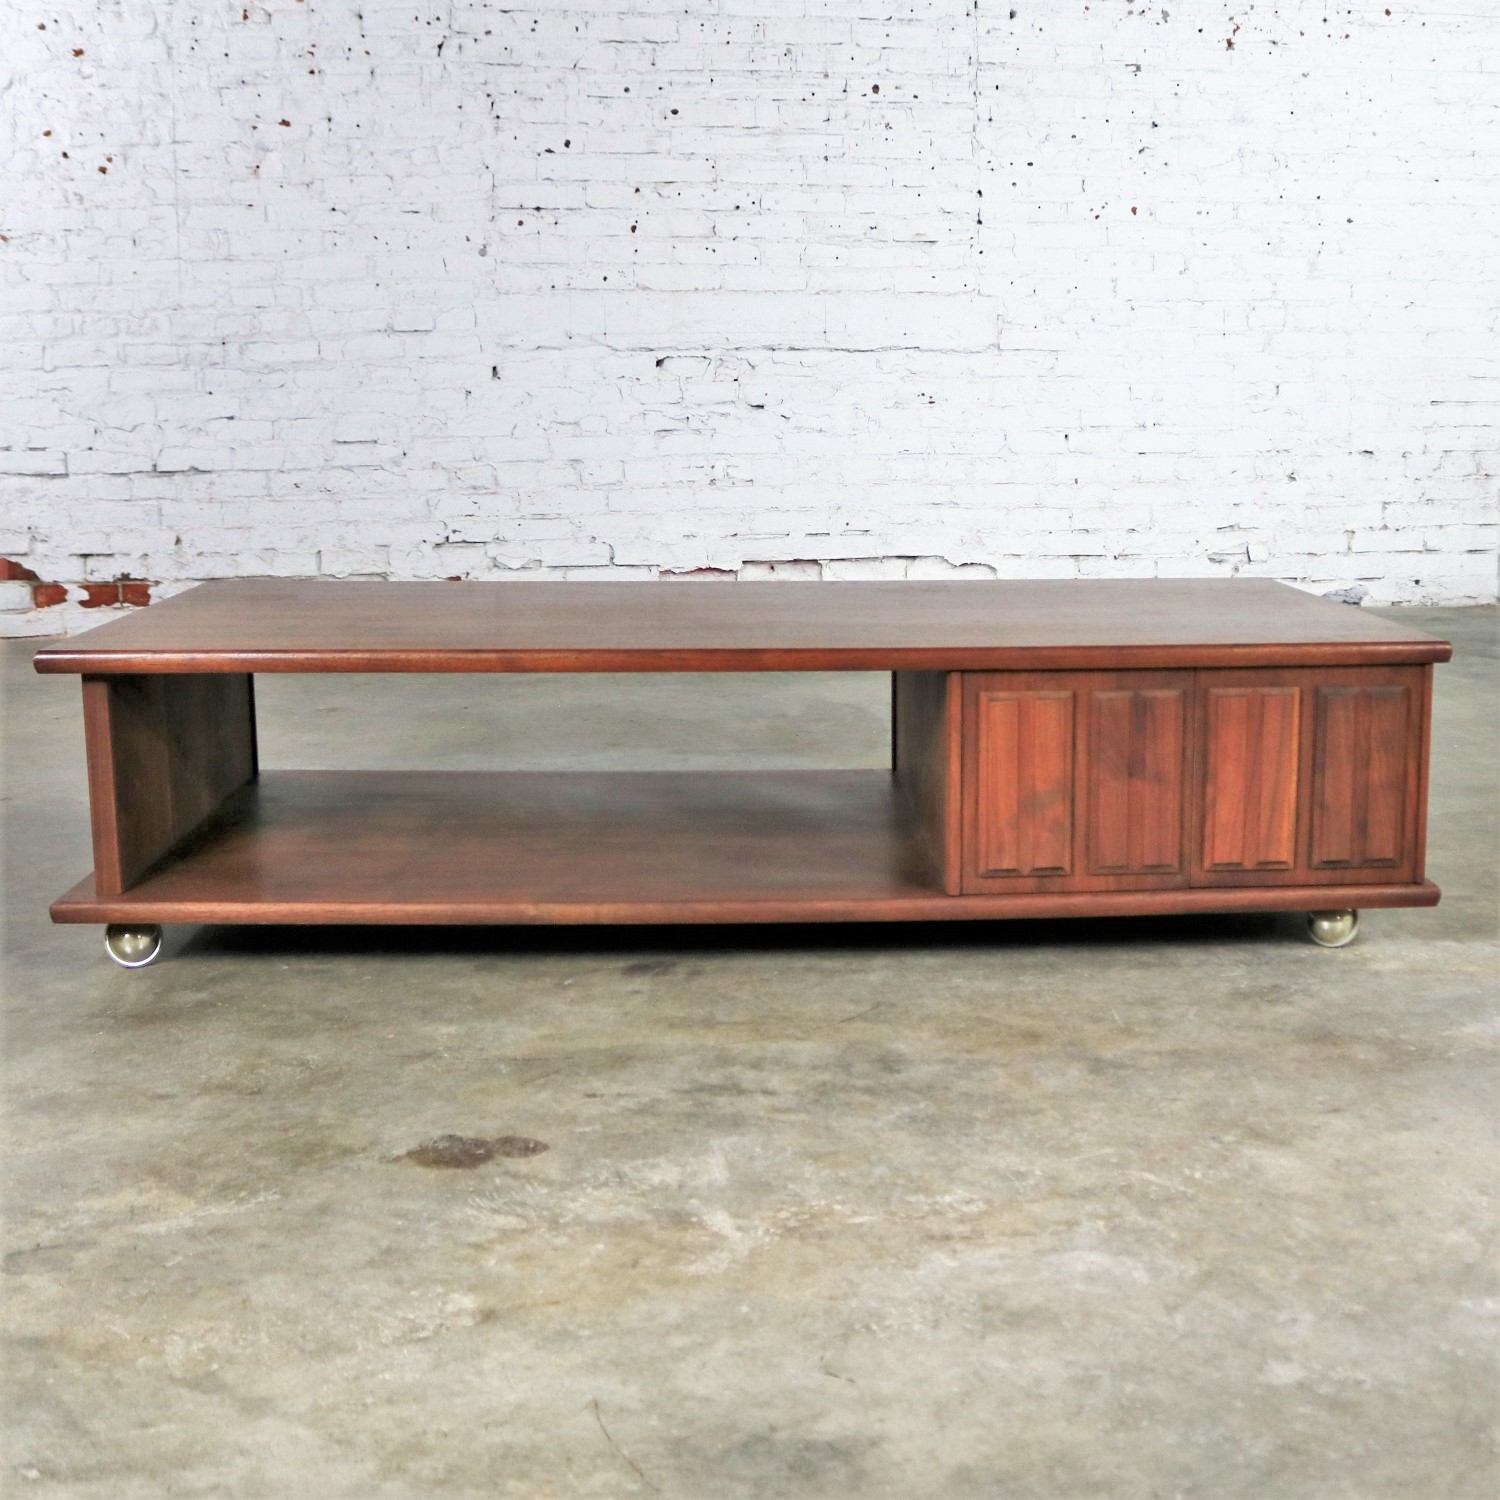 Low Slung Walnut Mid Century Rectangular Coffee Table with Storage on Casters